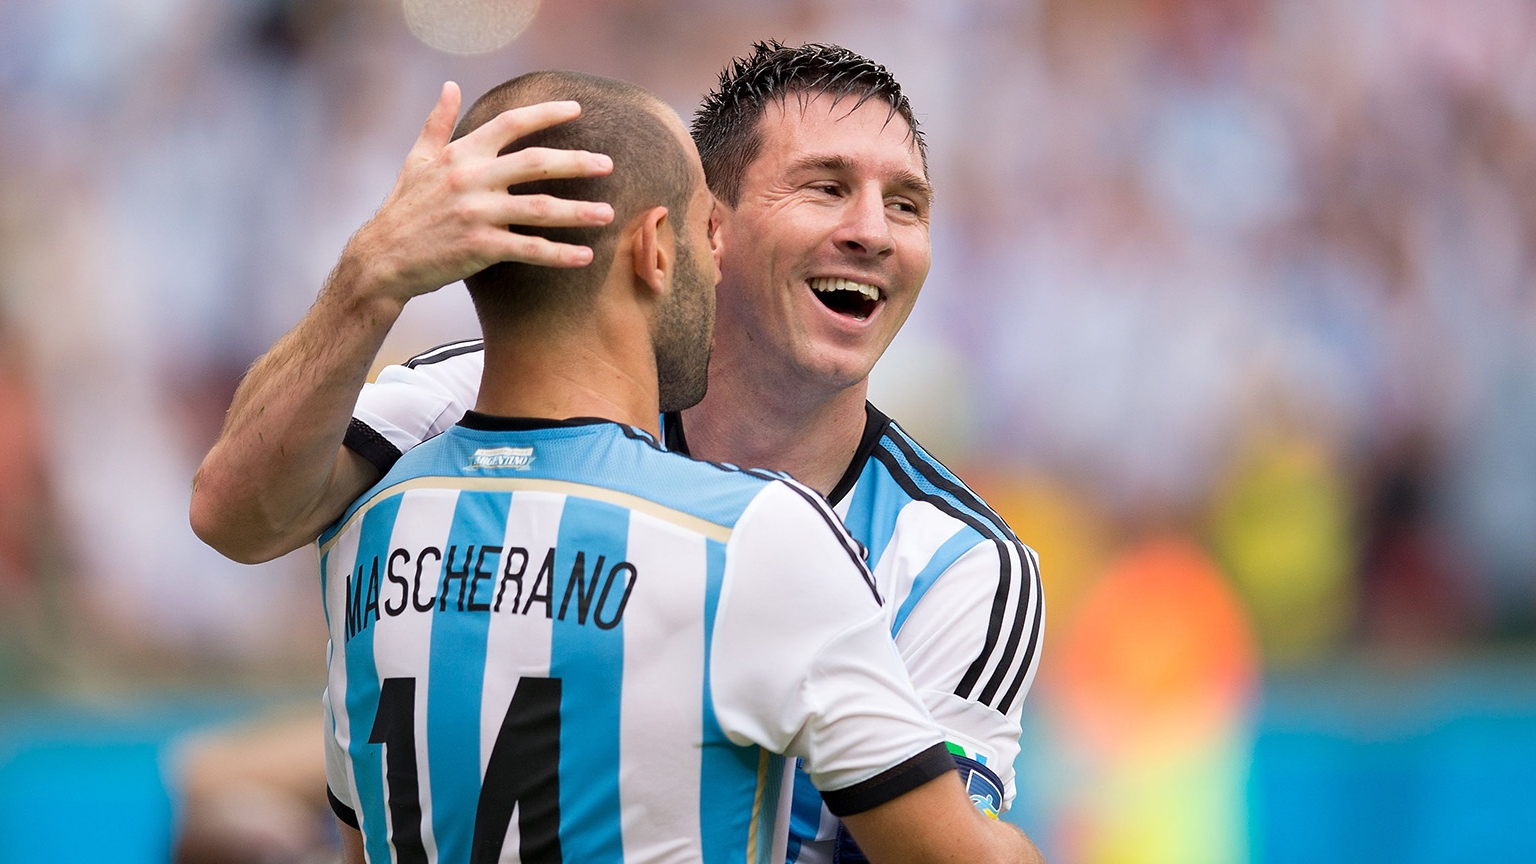 Strictly Editorial Use Only - No MerchandisingMandatory Credit: Photo by Ben Queenborough/BPI/Shutterstock (3869935n)Lionel Messi of Argentina celebrates scoring a goal with Javier Mascherano after making it 2-1Nigeria v Argentina, 2014 FIFA World Cup, Group F, Estadio Beira-Rio, Porto Alegre, Brazil - 25 Jun 2014